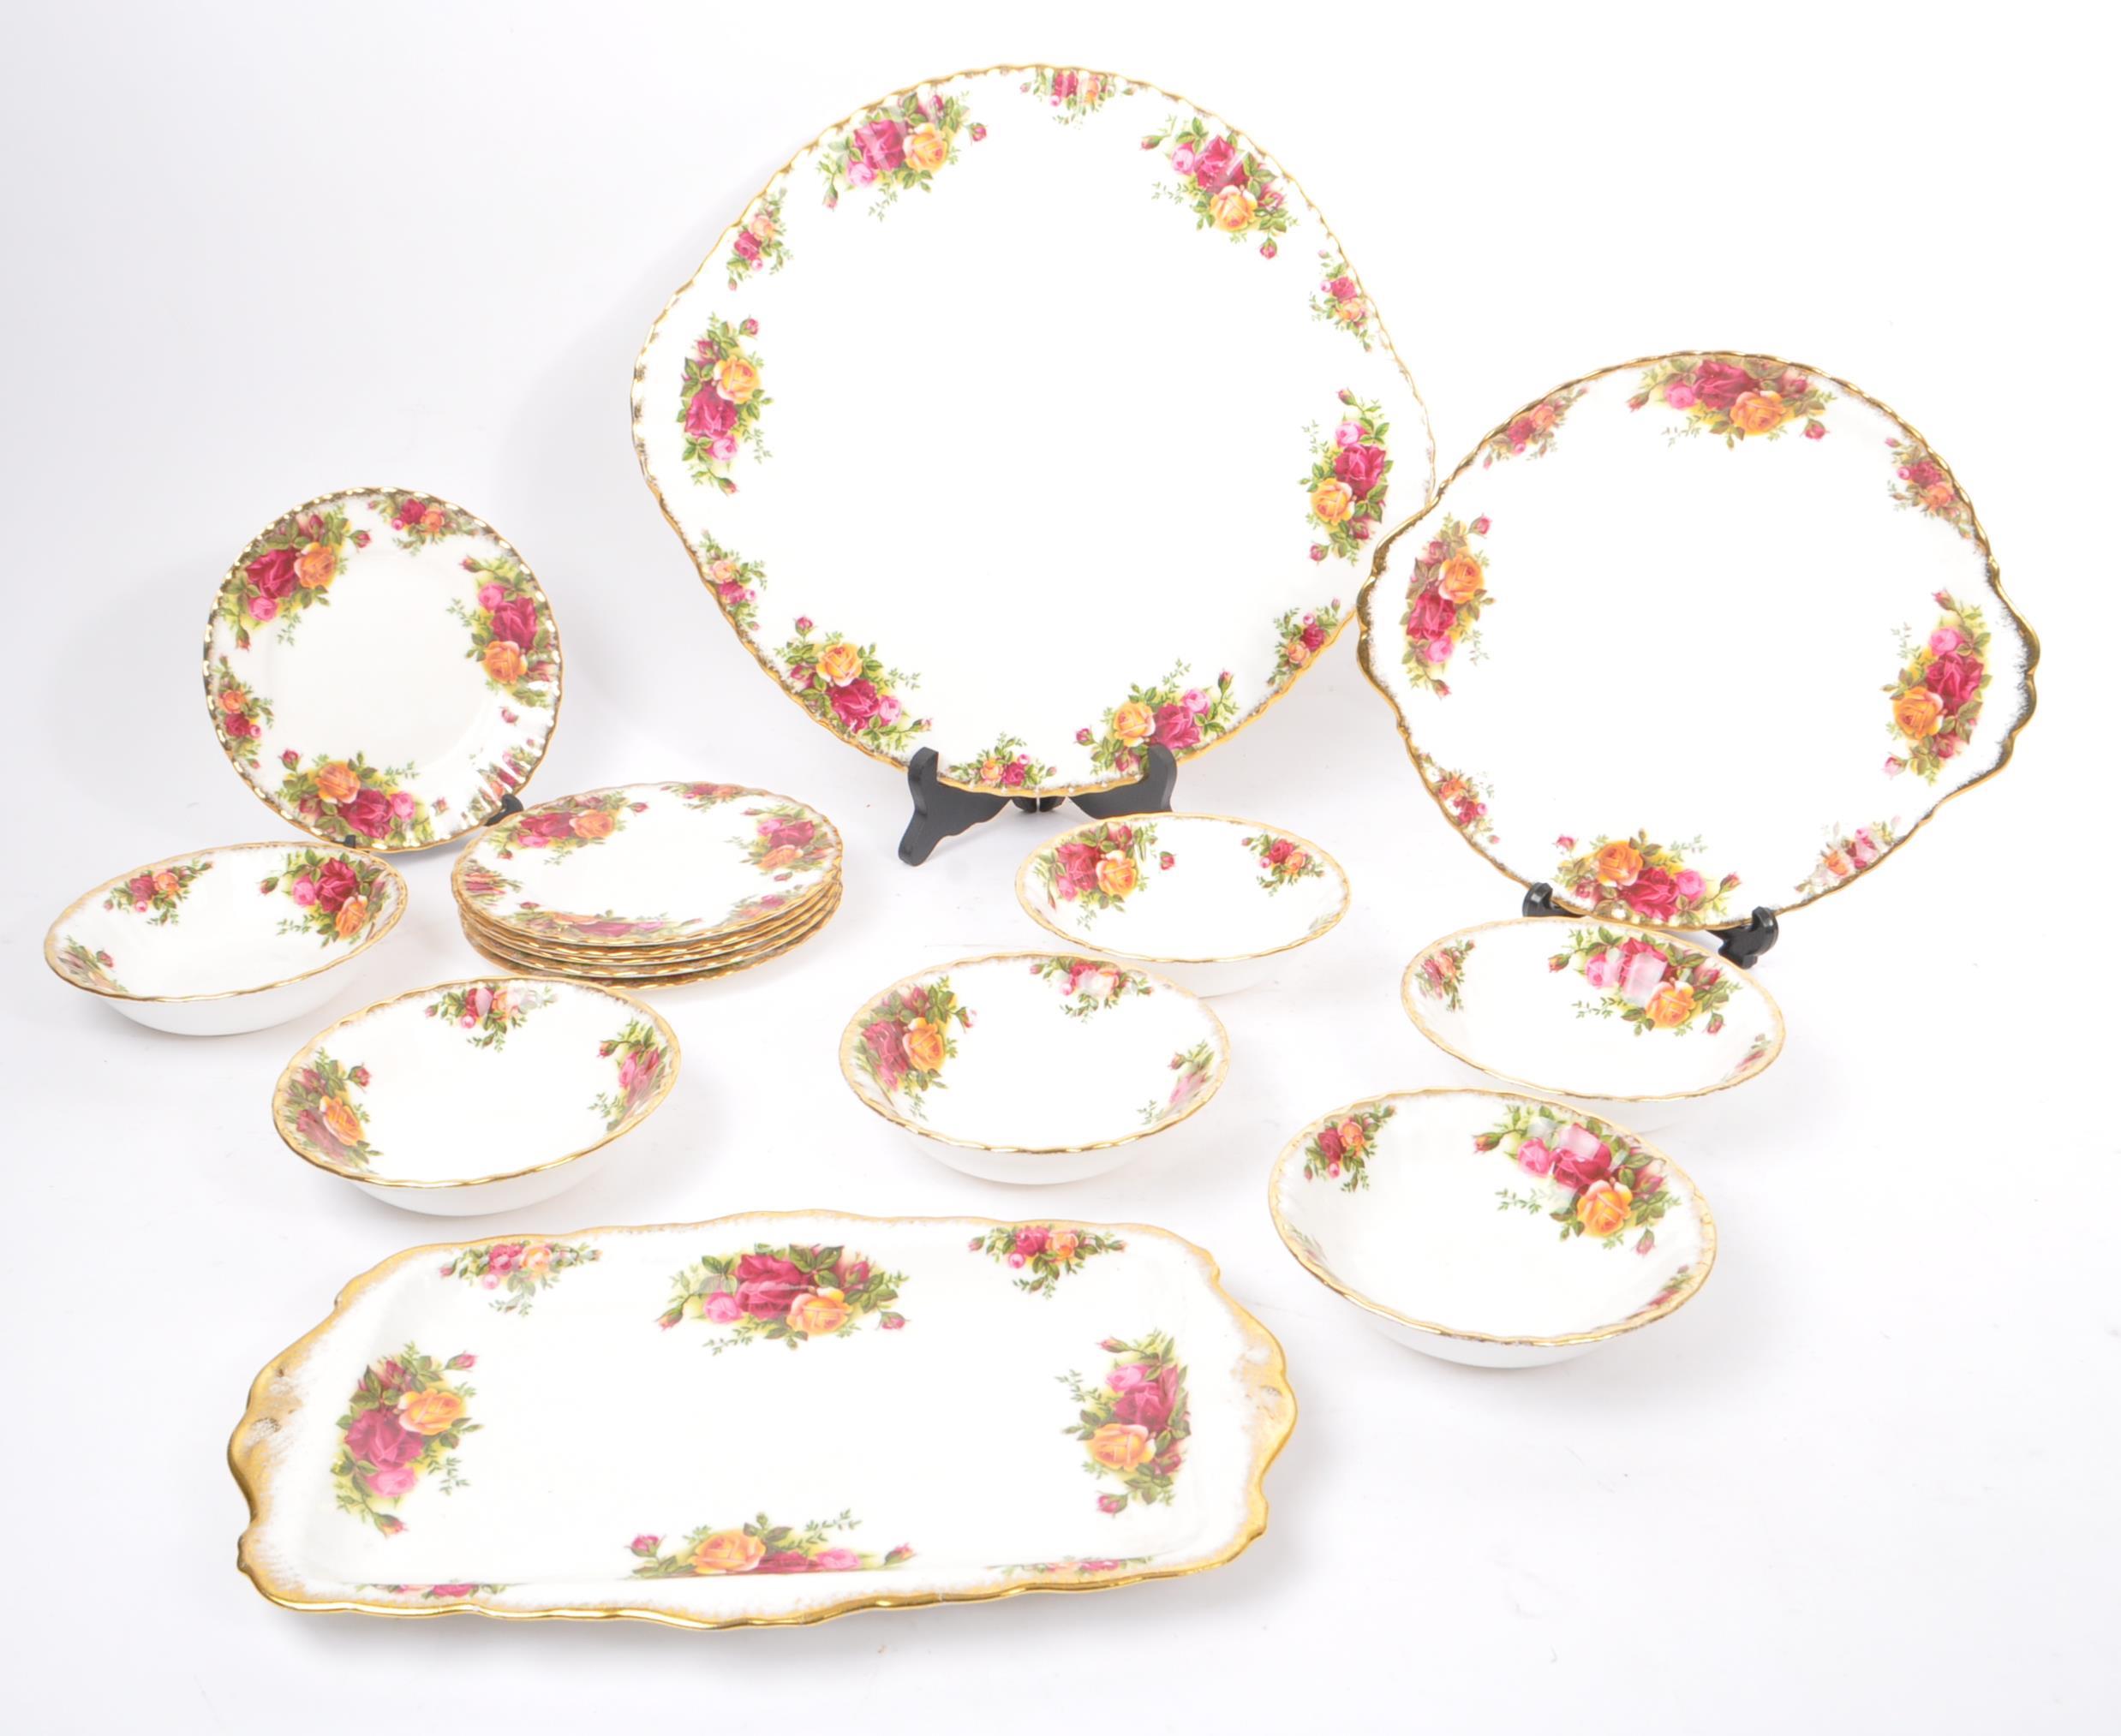 ROYAL ALBERT OLD COUNTRY ROSES - COLLECTION OF PLATE EXAMPLES